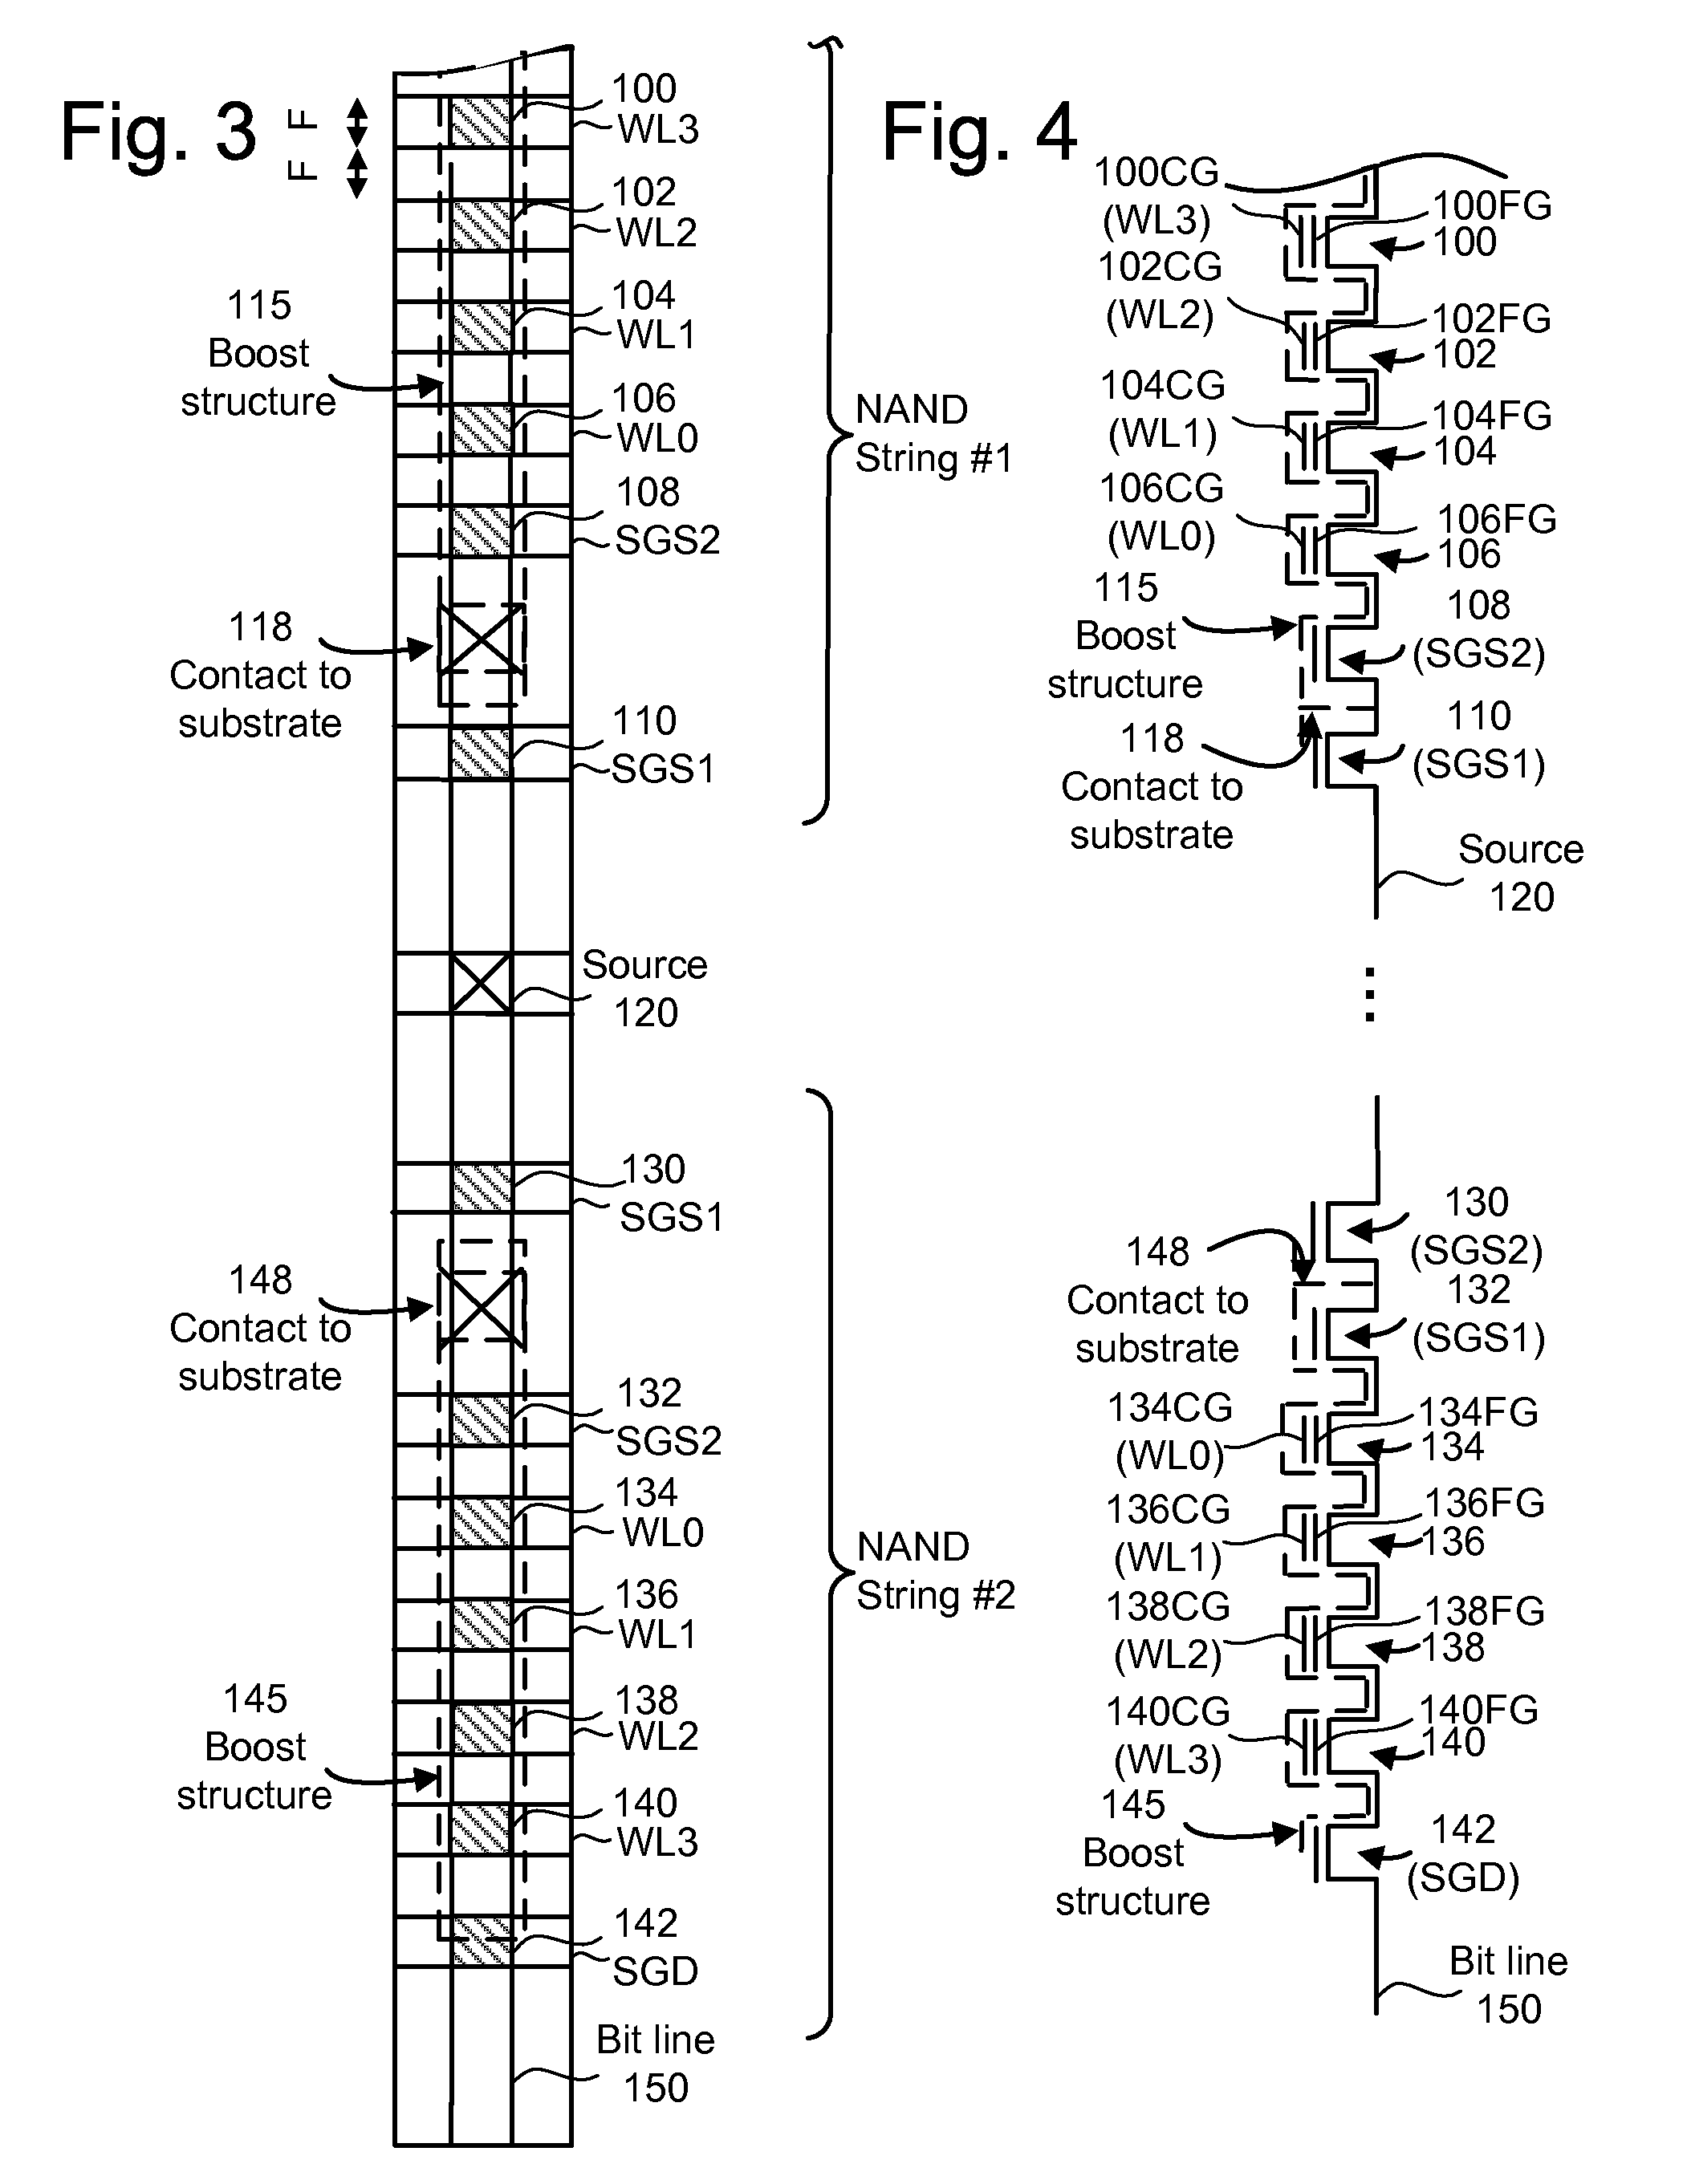 Operating non-volatile memory with boost structures